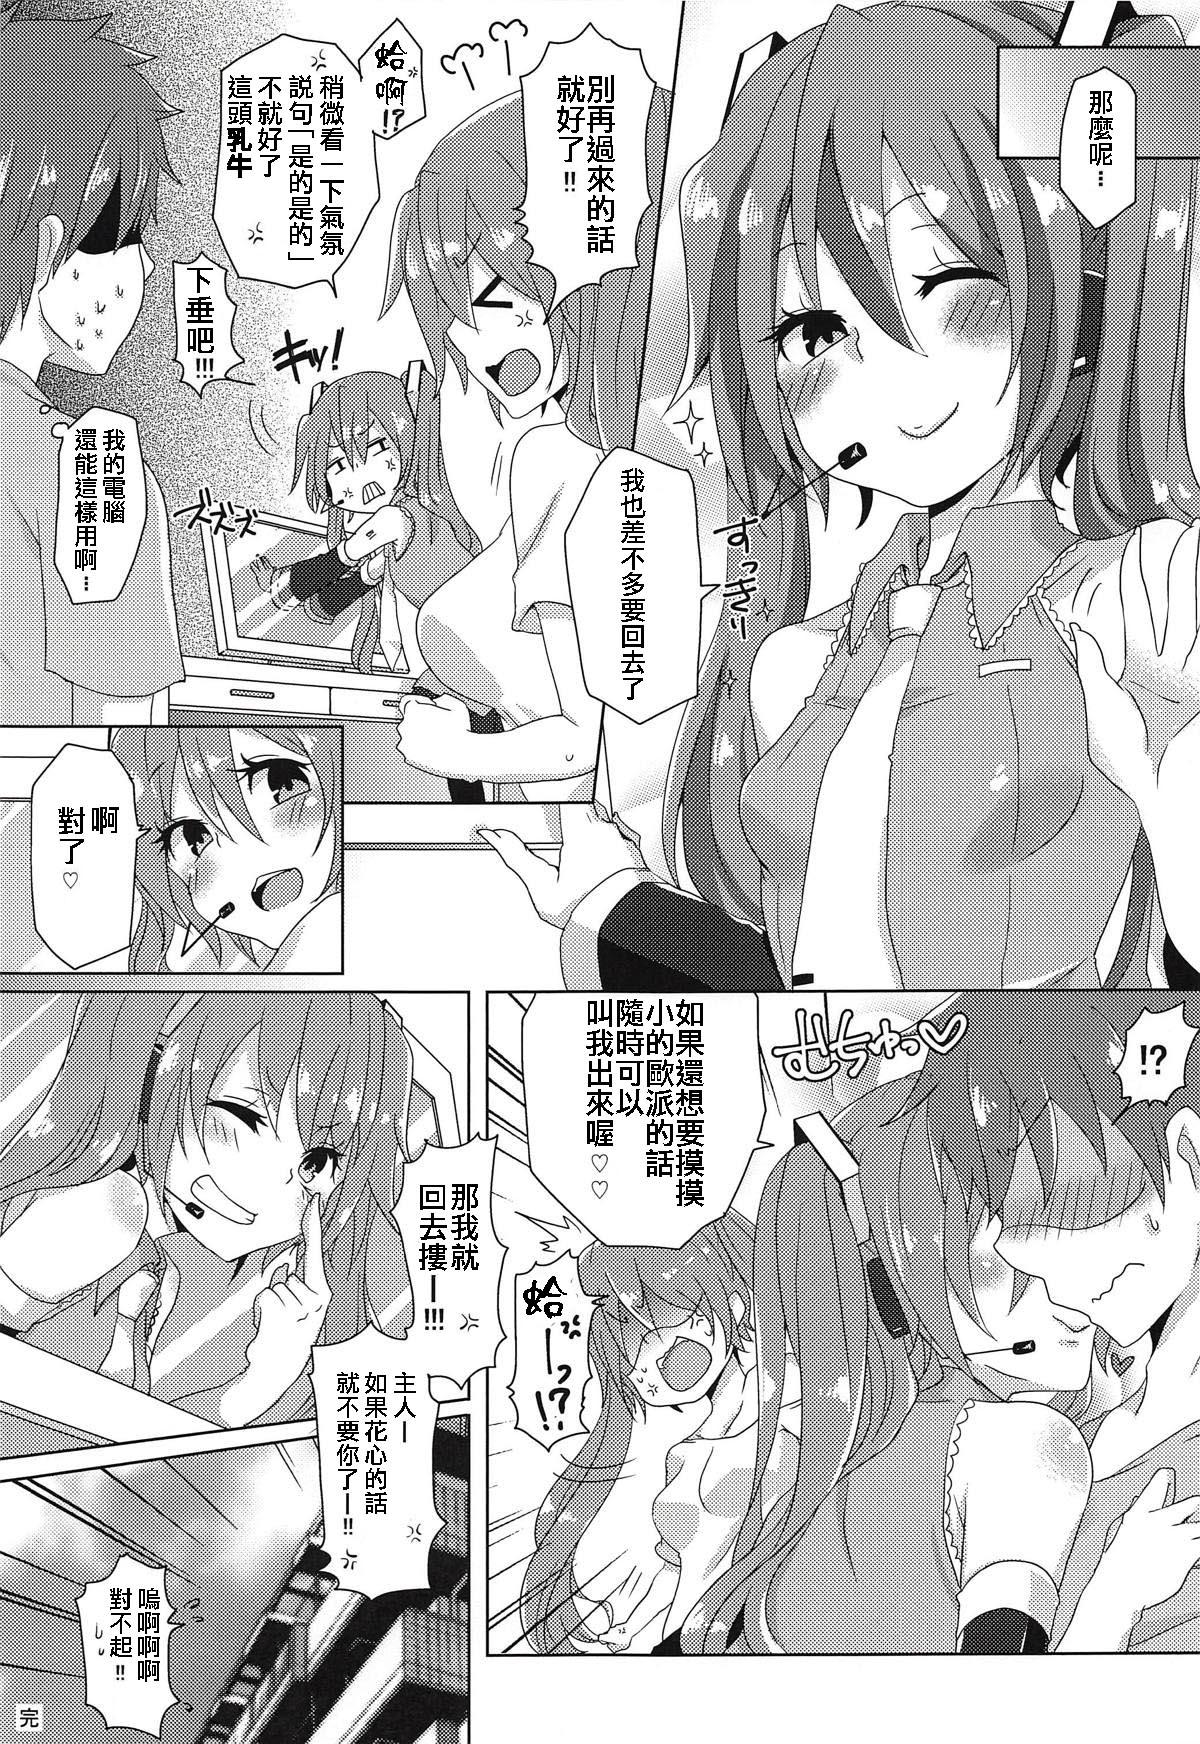 Outdoor (THE VOC@LOiD M@STER 41) [Kusoyuridanchi (Johnson)] Chippai-san to Deppai-san (VOCALOID) [Chinese] [舒馬克個人漢化] - Vocaloid Black Dick - Page 24